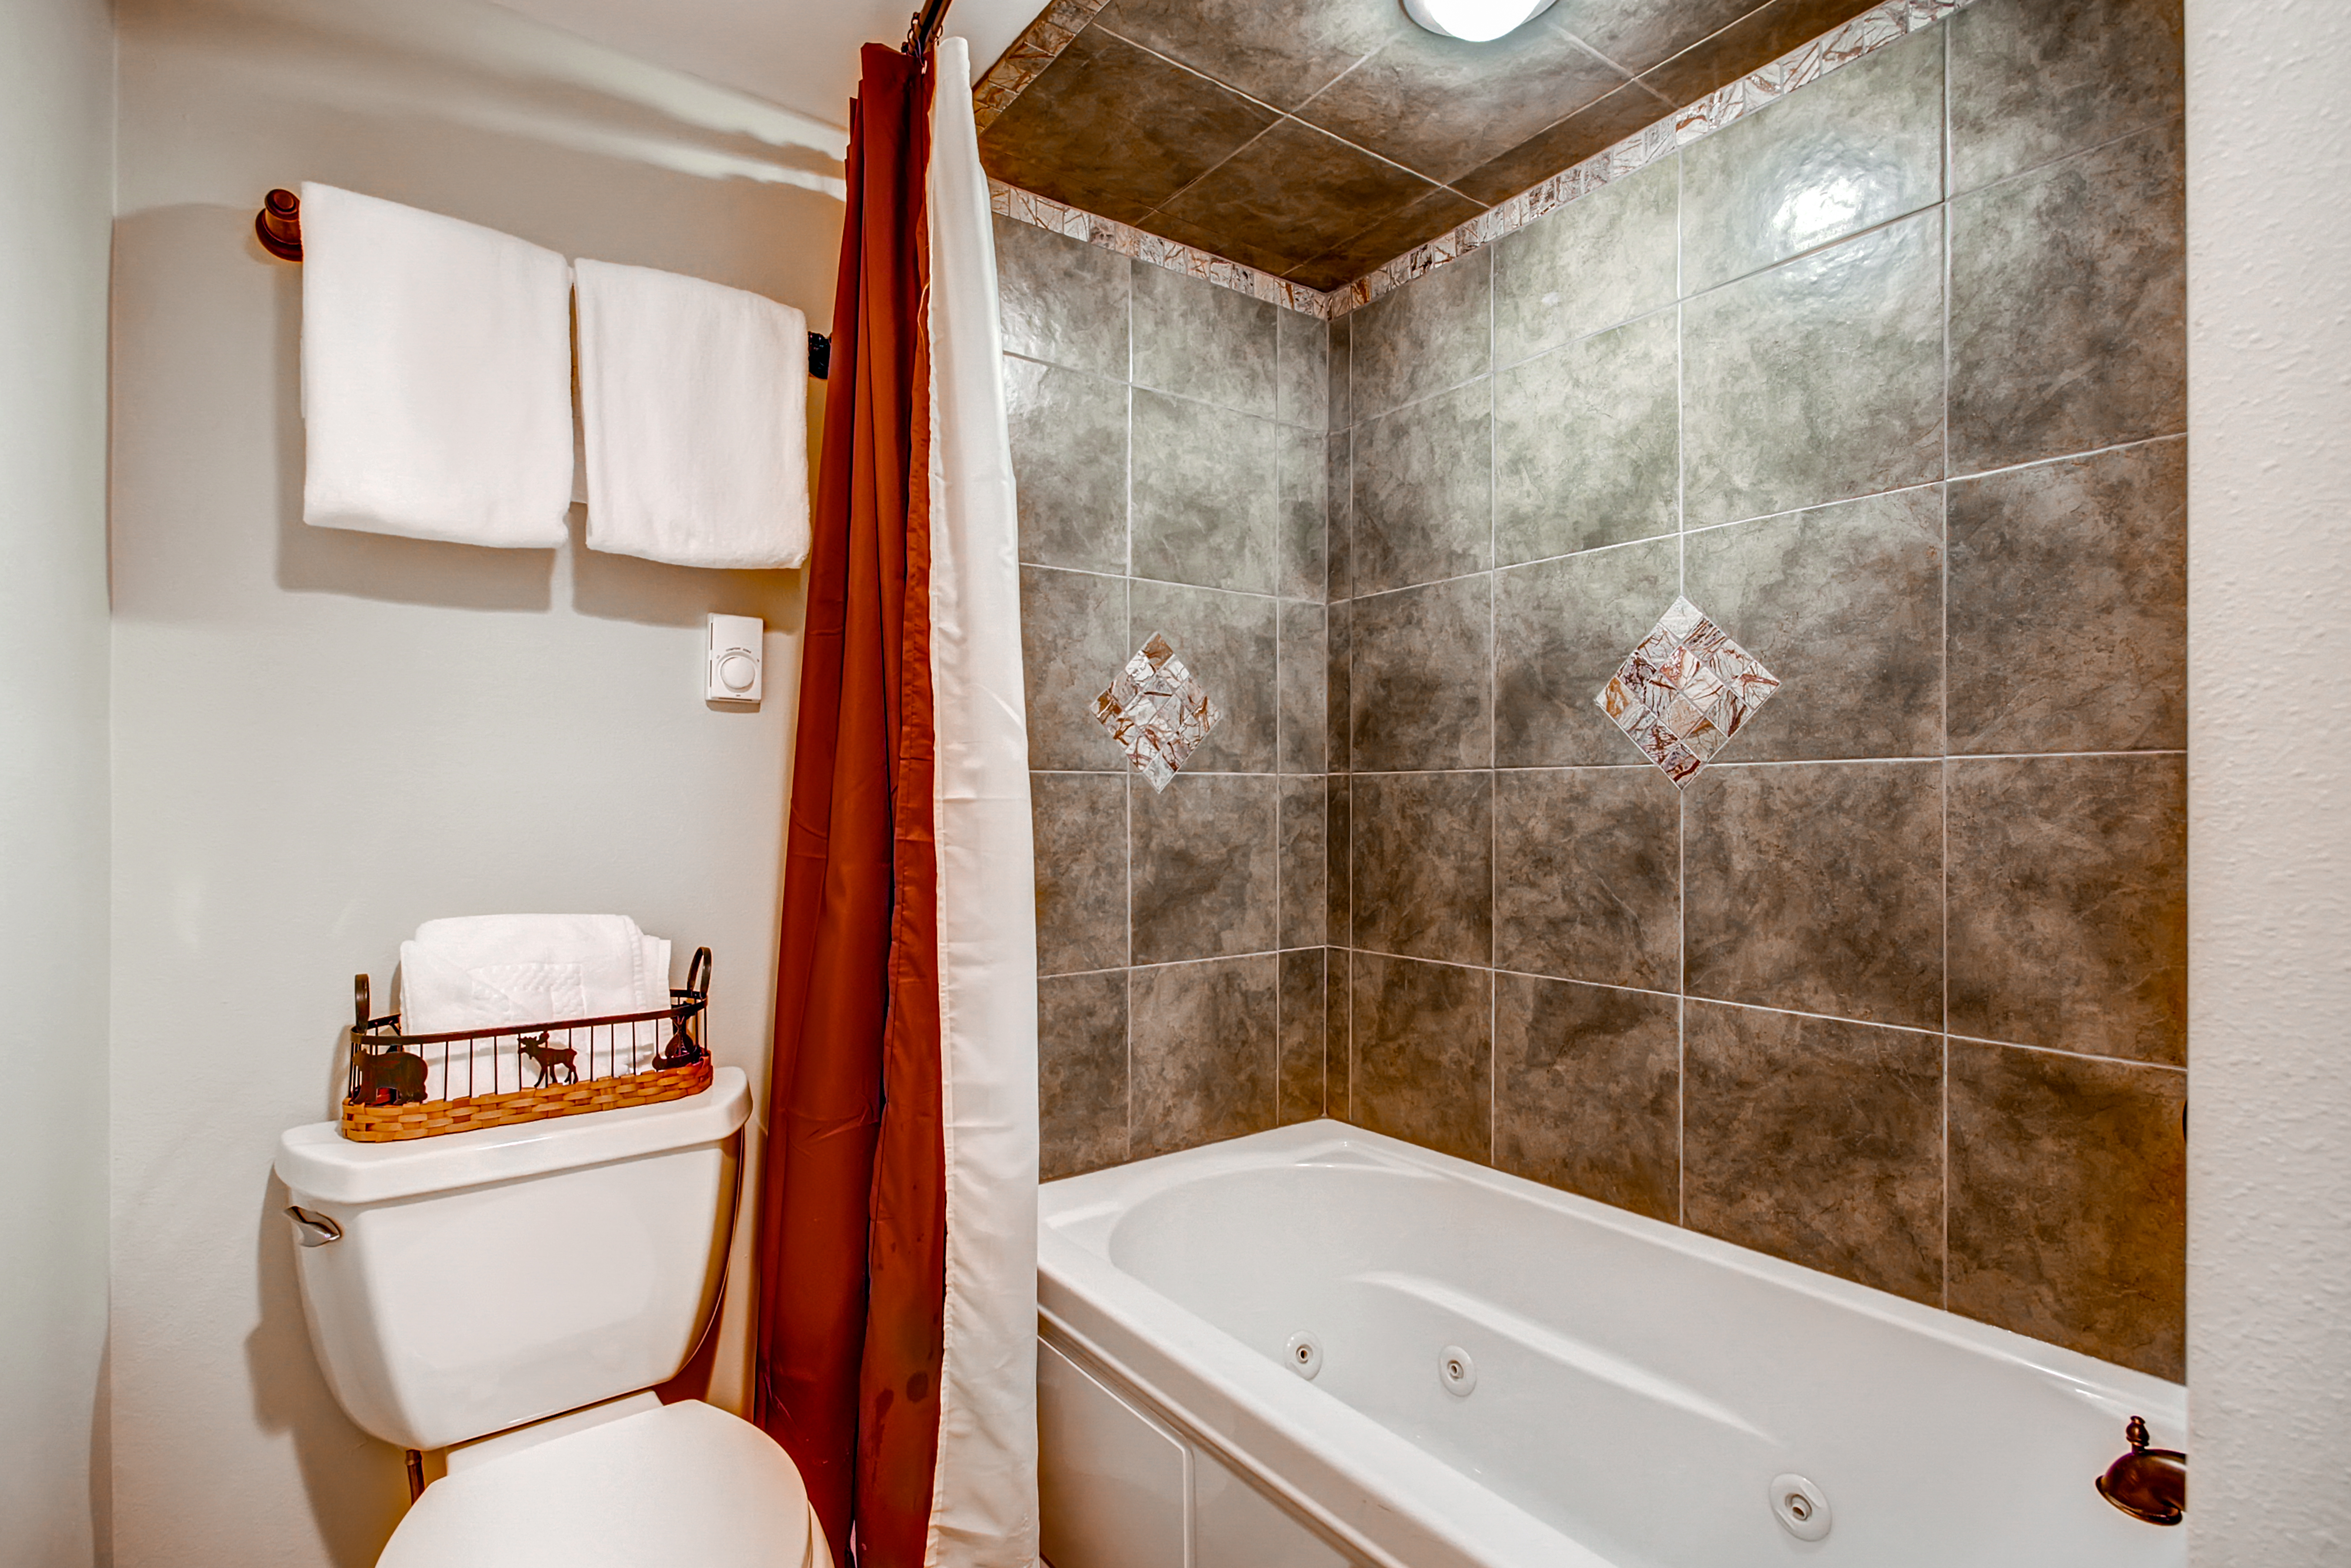 Jetted tub and shower combo in shared lower level bathroom - 4 O’Clock Lodge D26 Breckenridge Vacation Rental